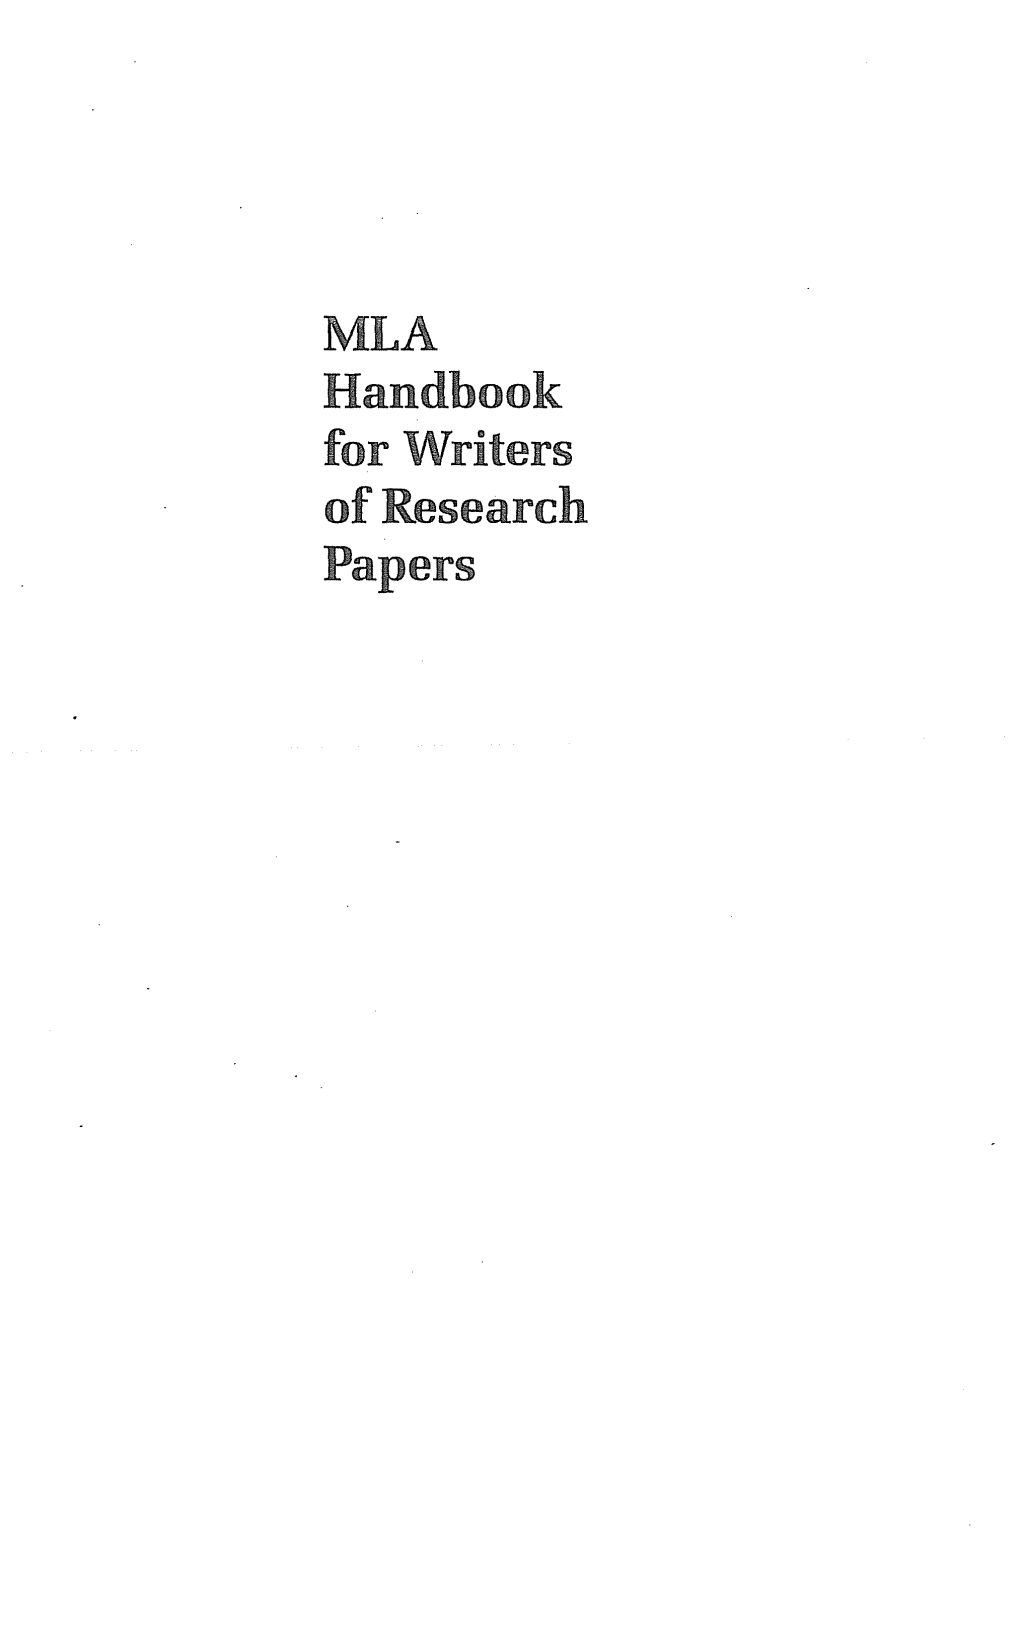 MLA Handbook for Writers Ofresearch Papers